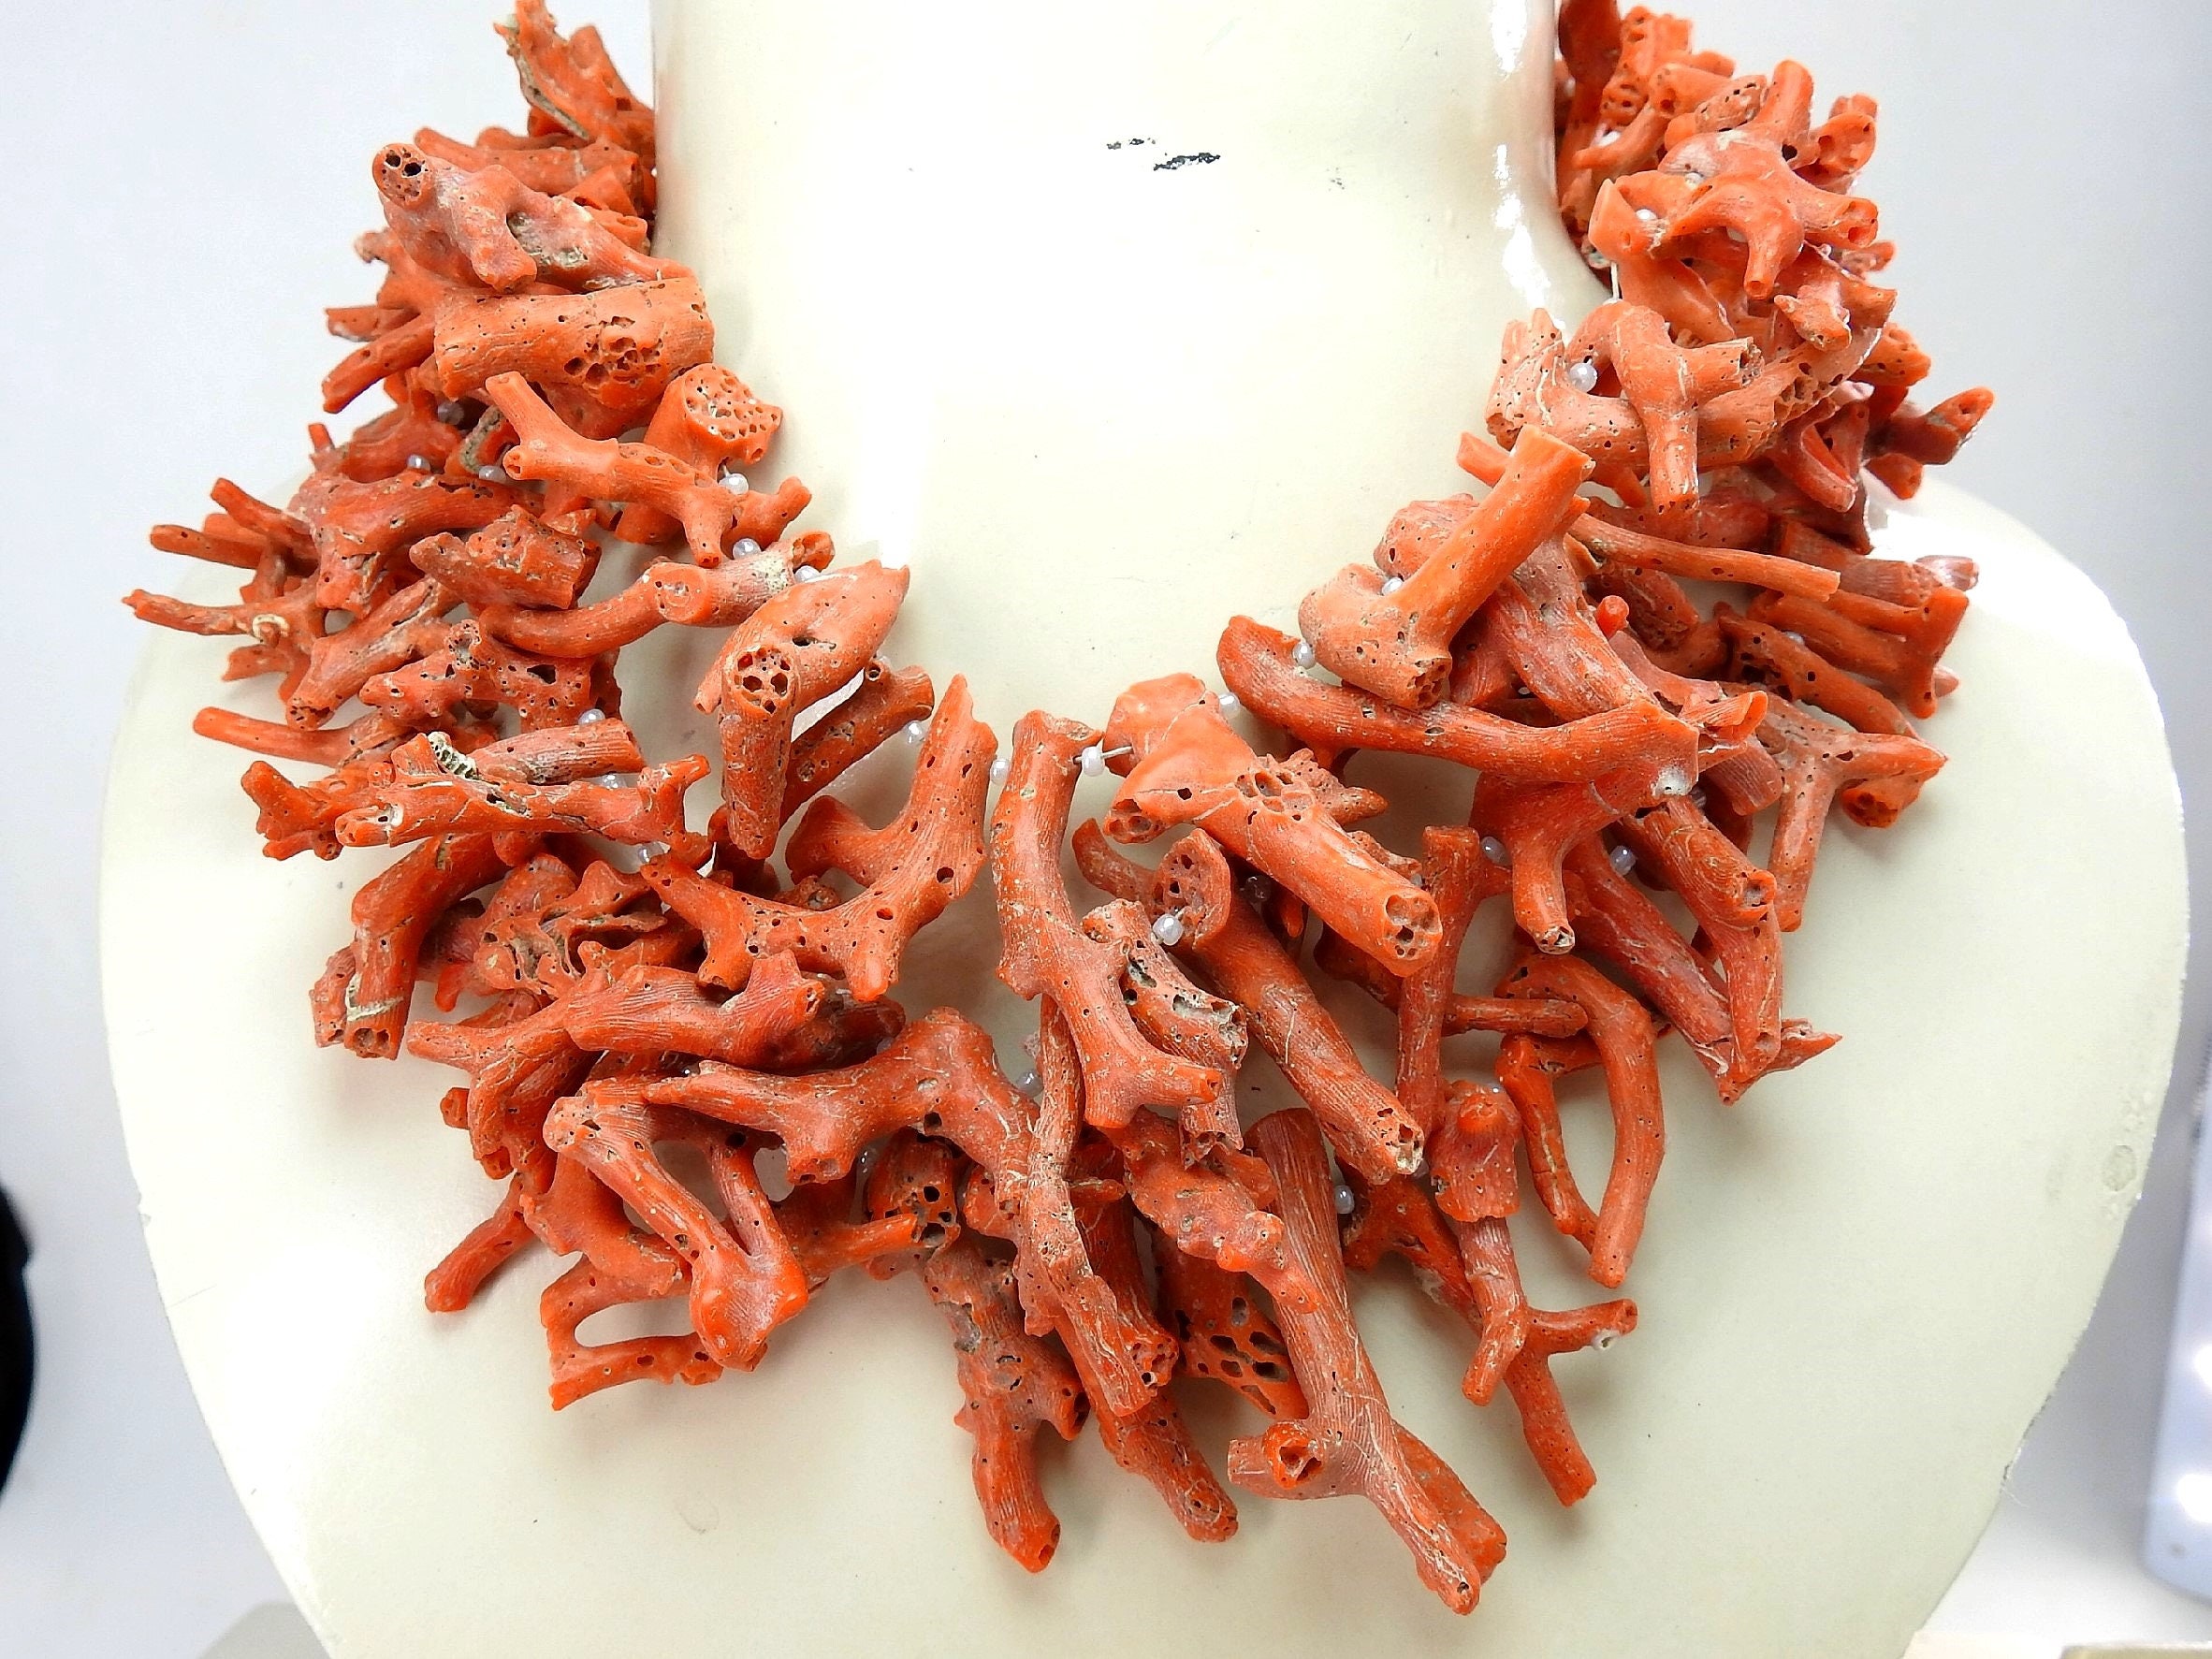 Red Coral Natural Rough Stick,Branches,Loose Bead,Raw,For Making Jewelry,Wholesaler,Supplies 12Inch Strand 100%Natural WM-CR1 | Save 33% - Rajasthan Living 10